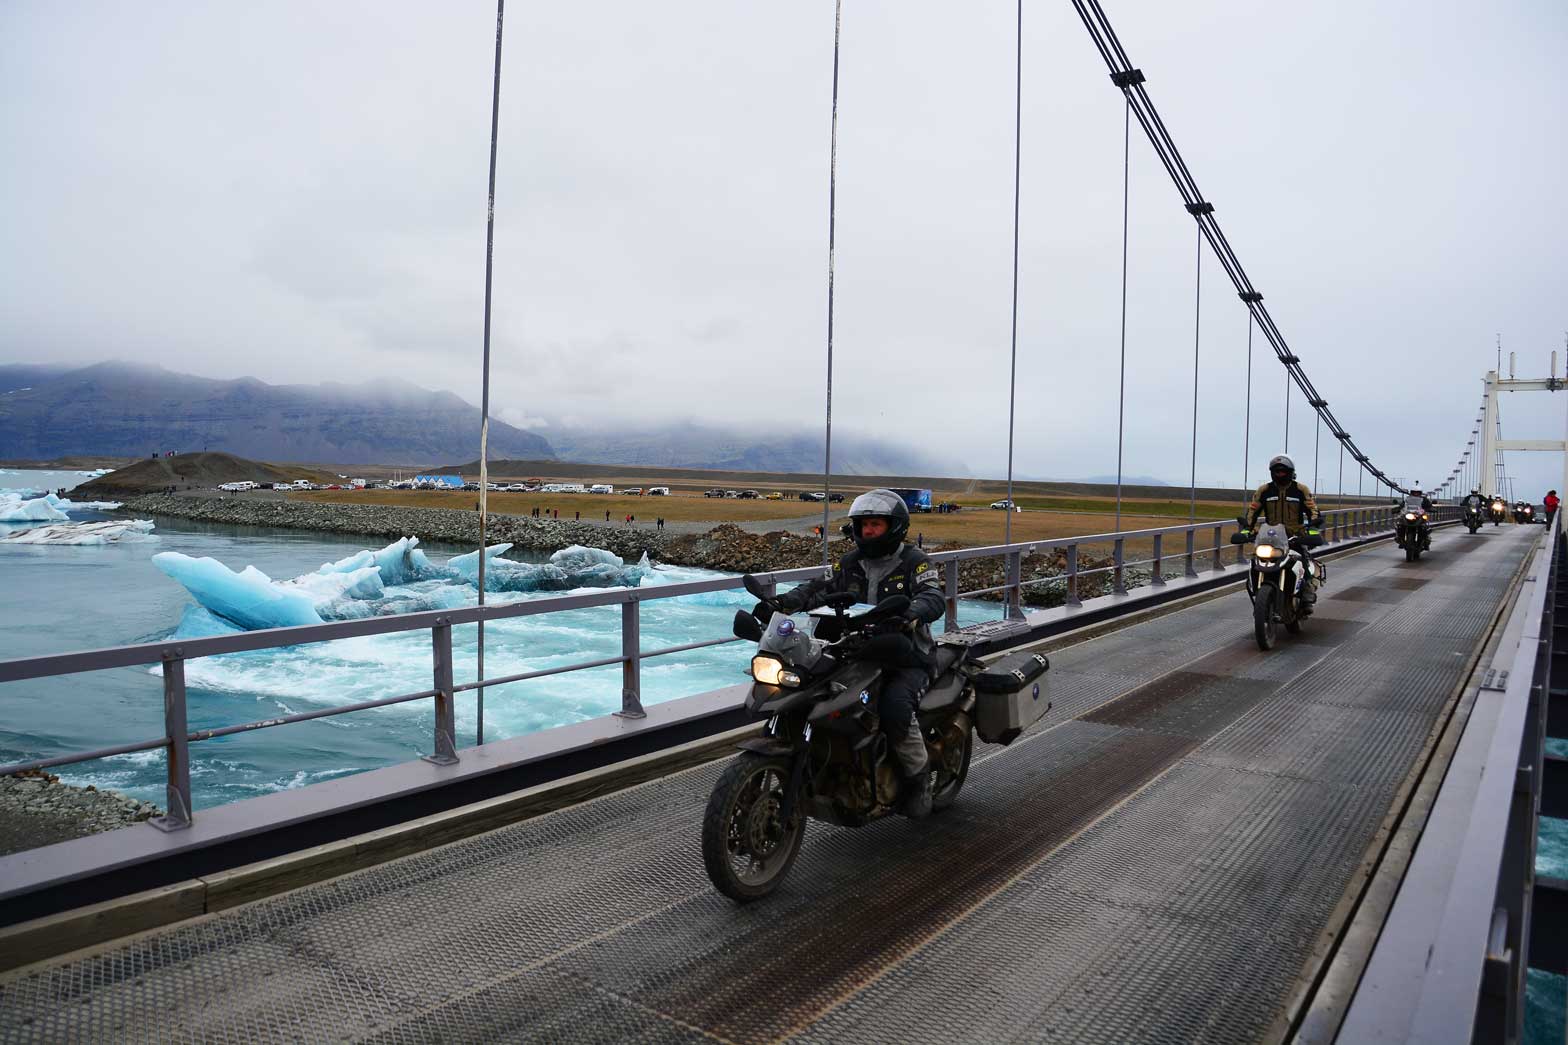 Iceland Adventure - Motorcycle Tour by Ayres Adventures